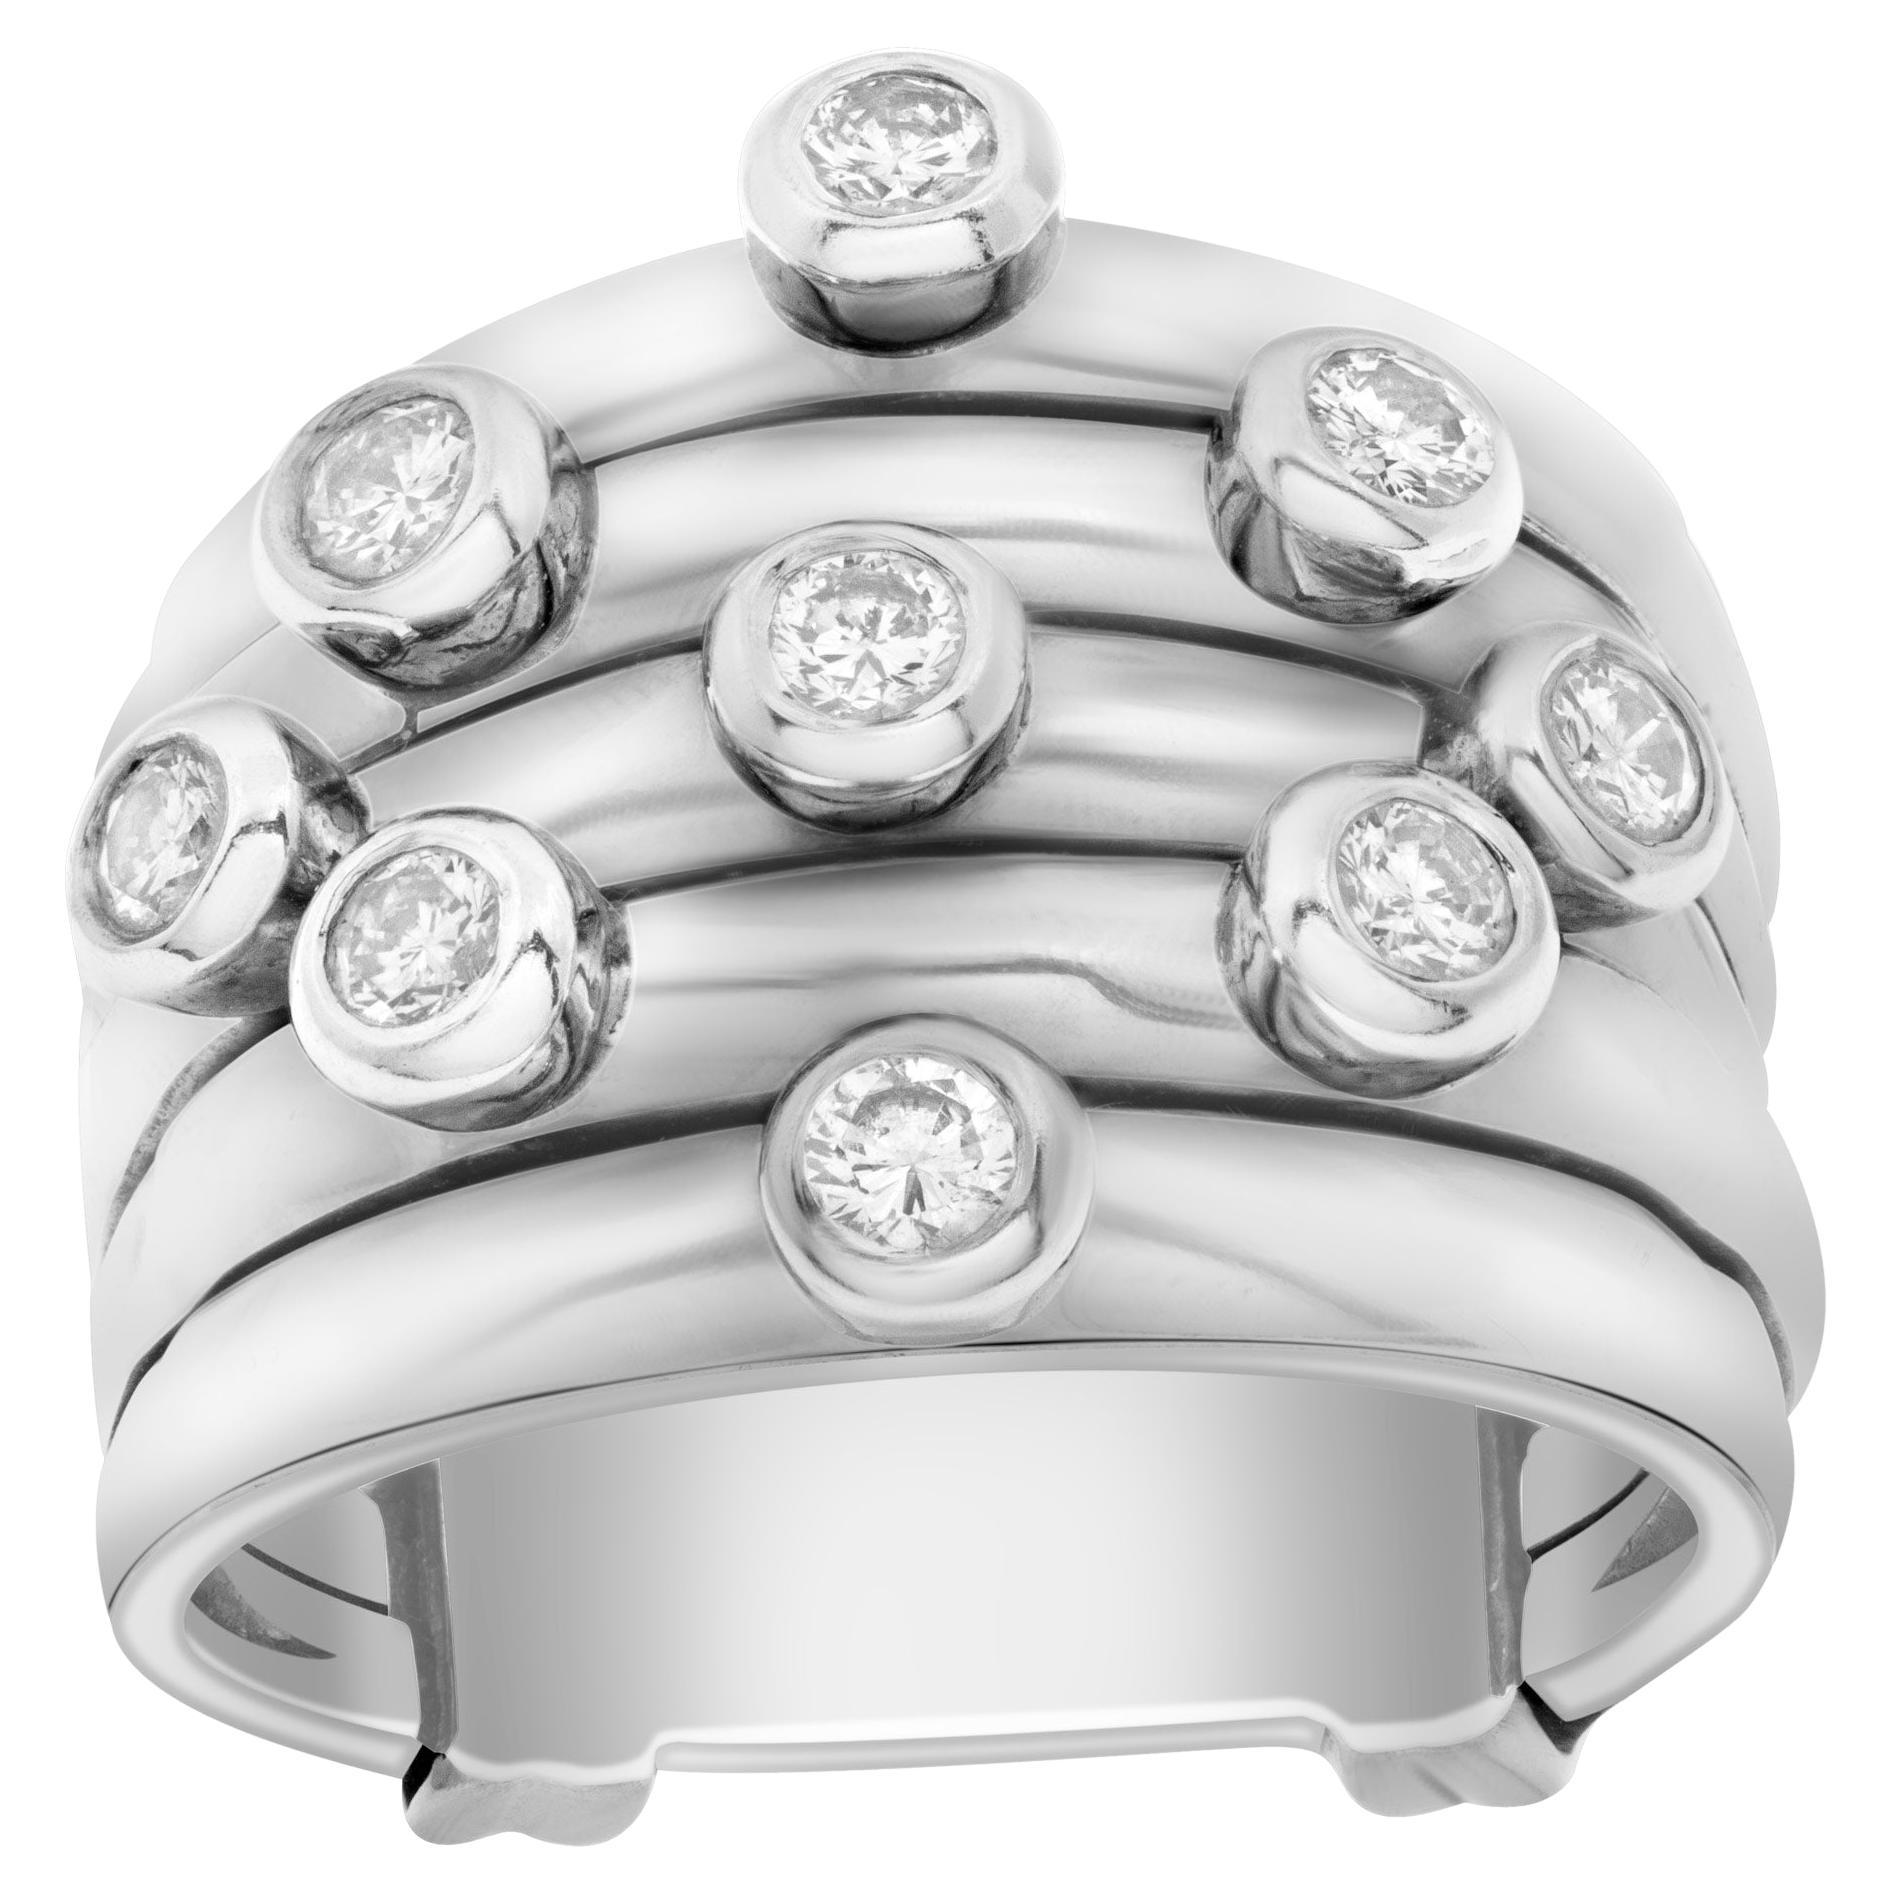 Ring in 18k White Gold with Diamond Accents